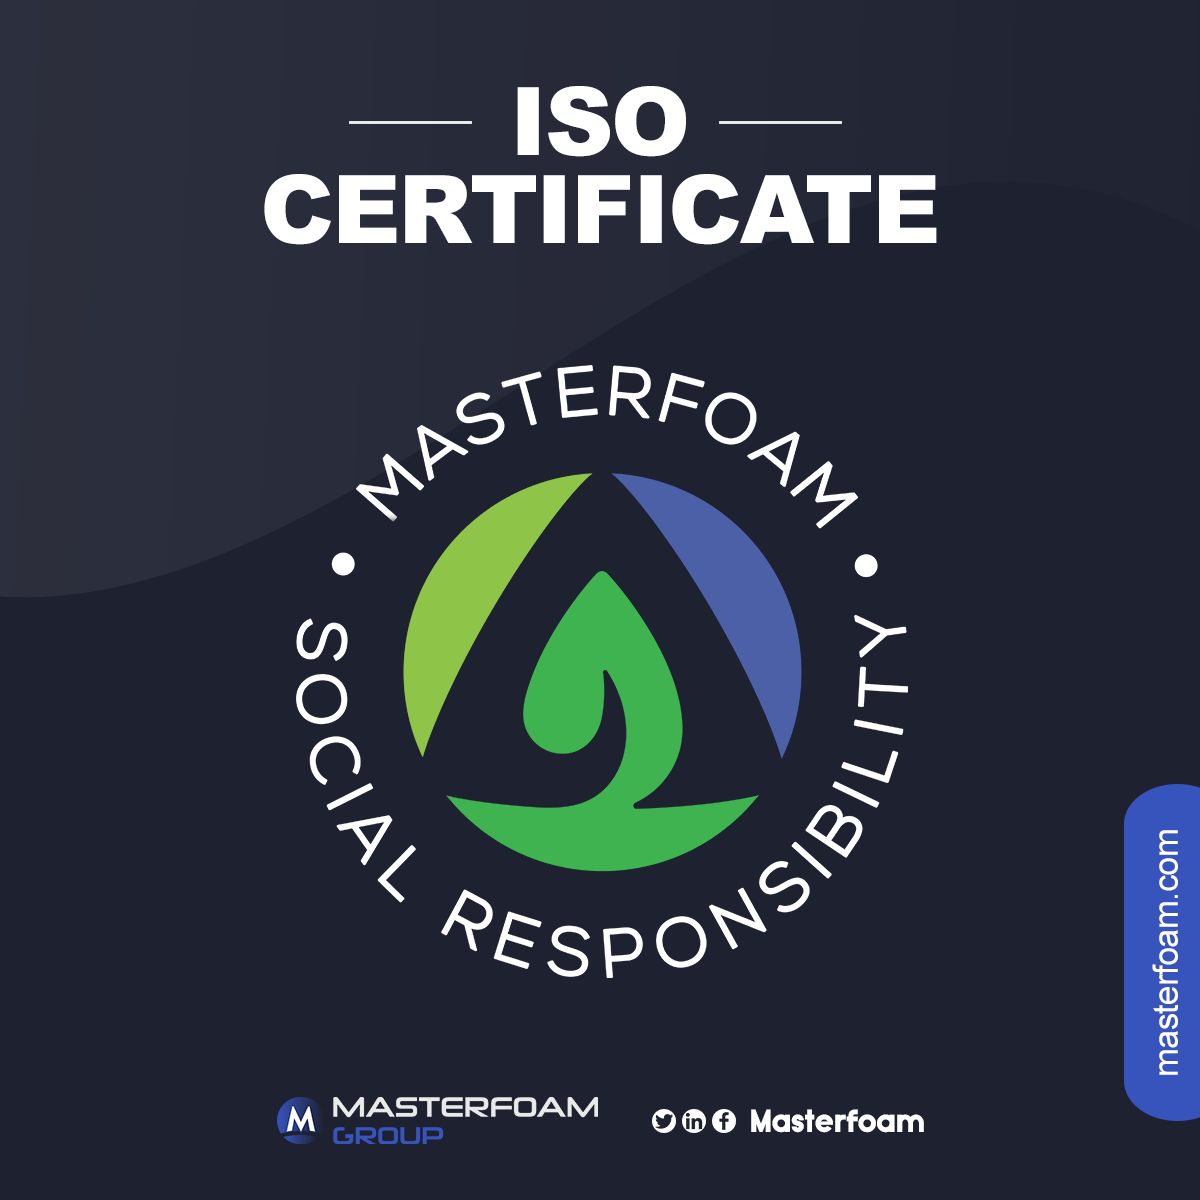 Masterfoam in Romania has achieved ISO 14001 certification